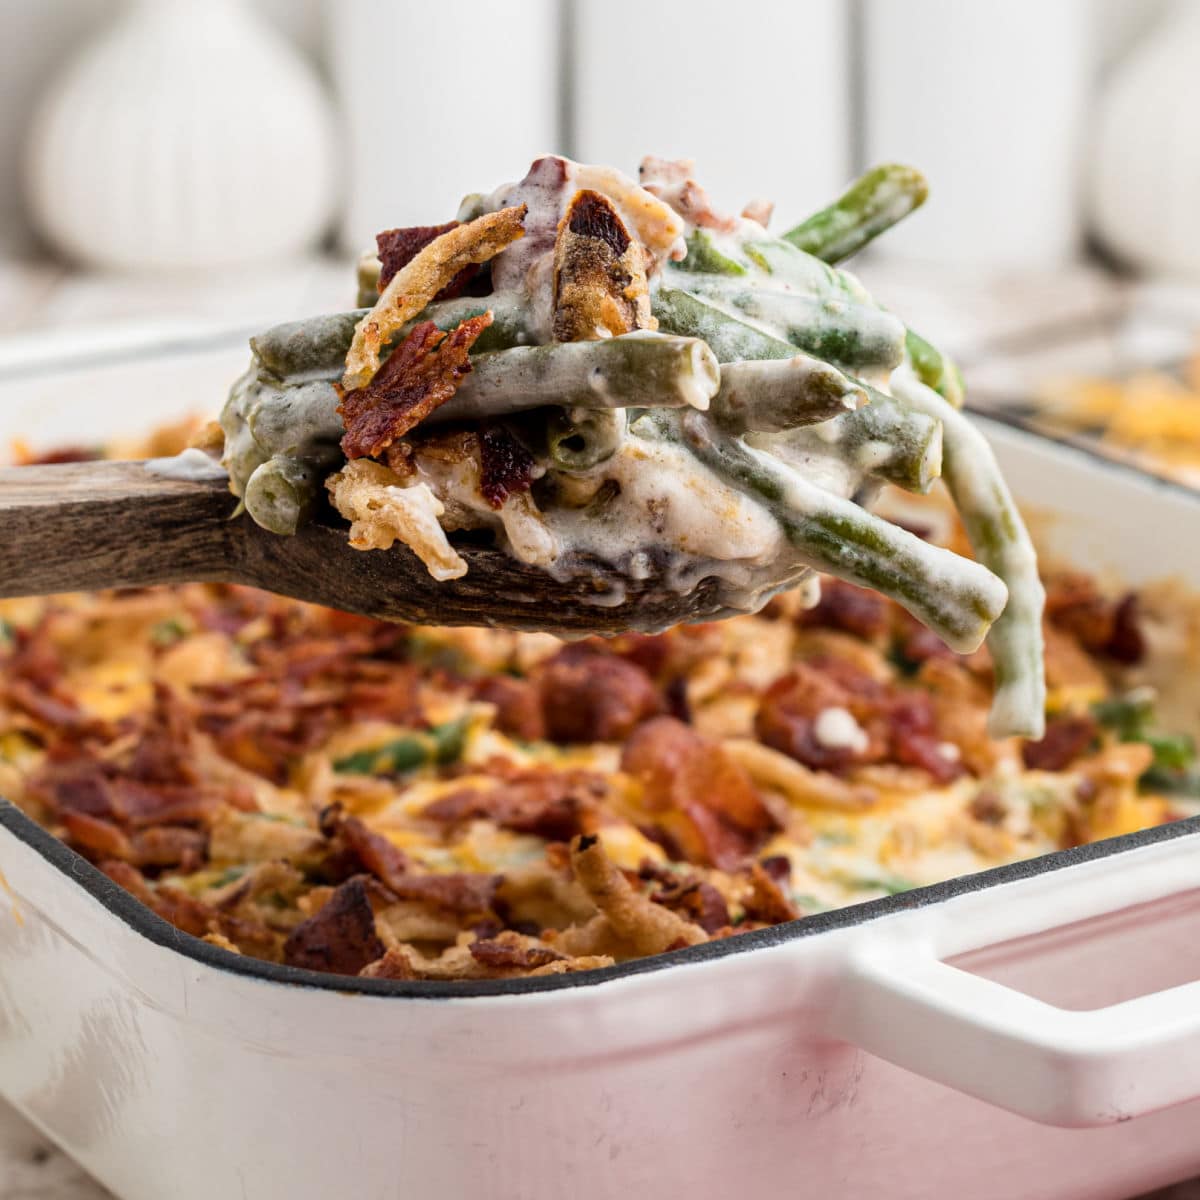 A scoop of loaded green bean casserole being lifted out of the dish.